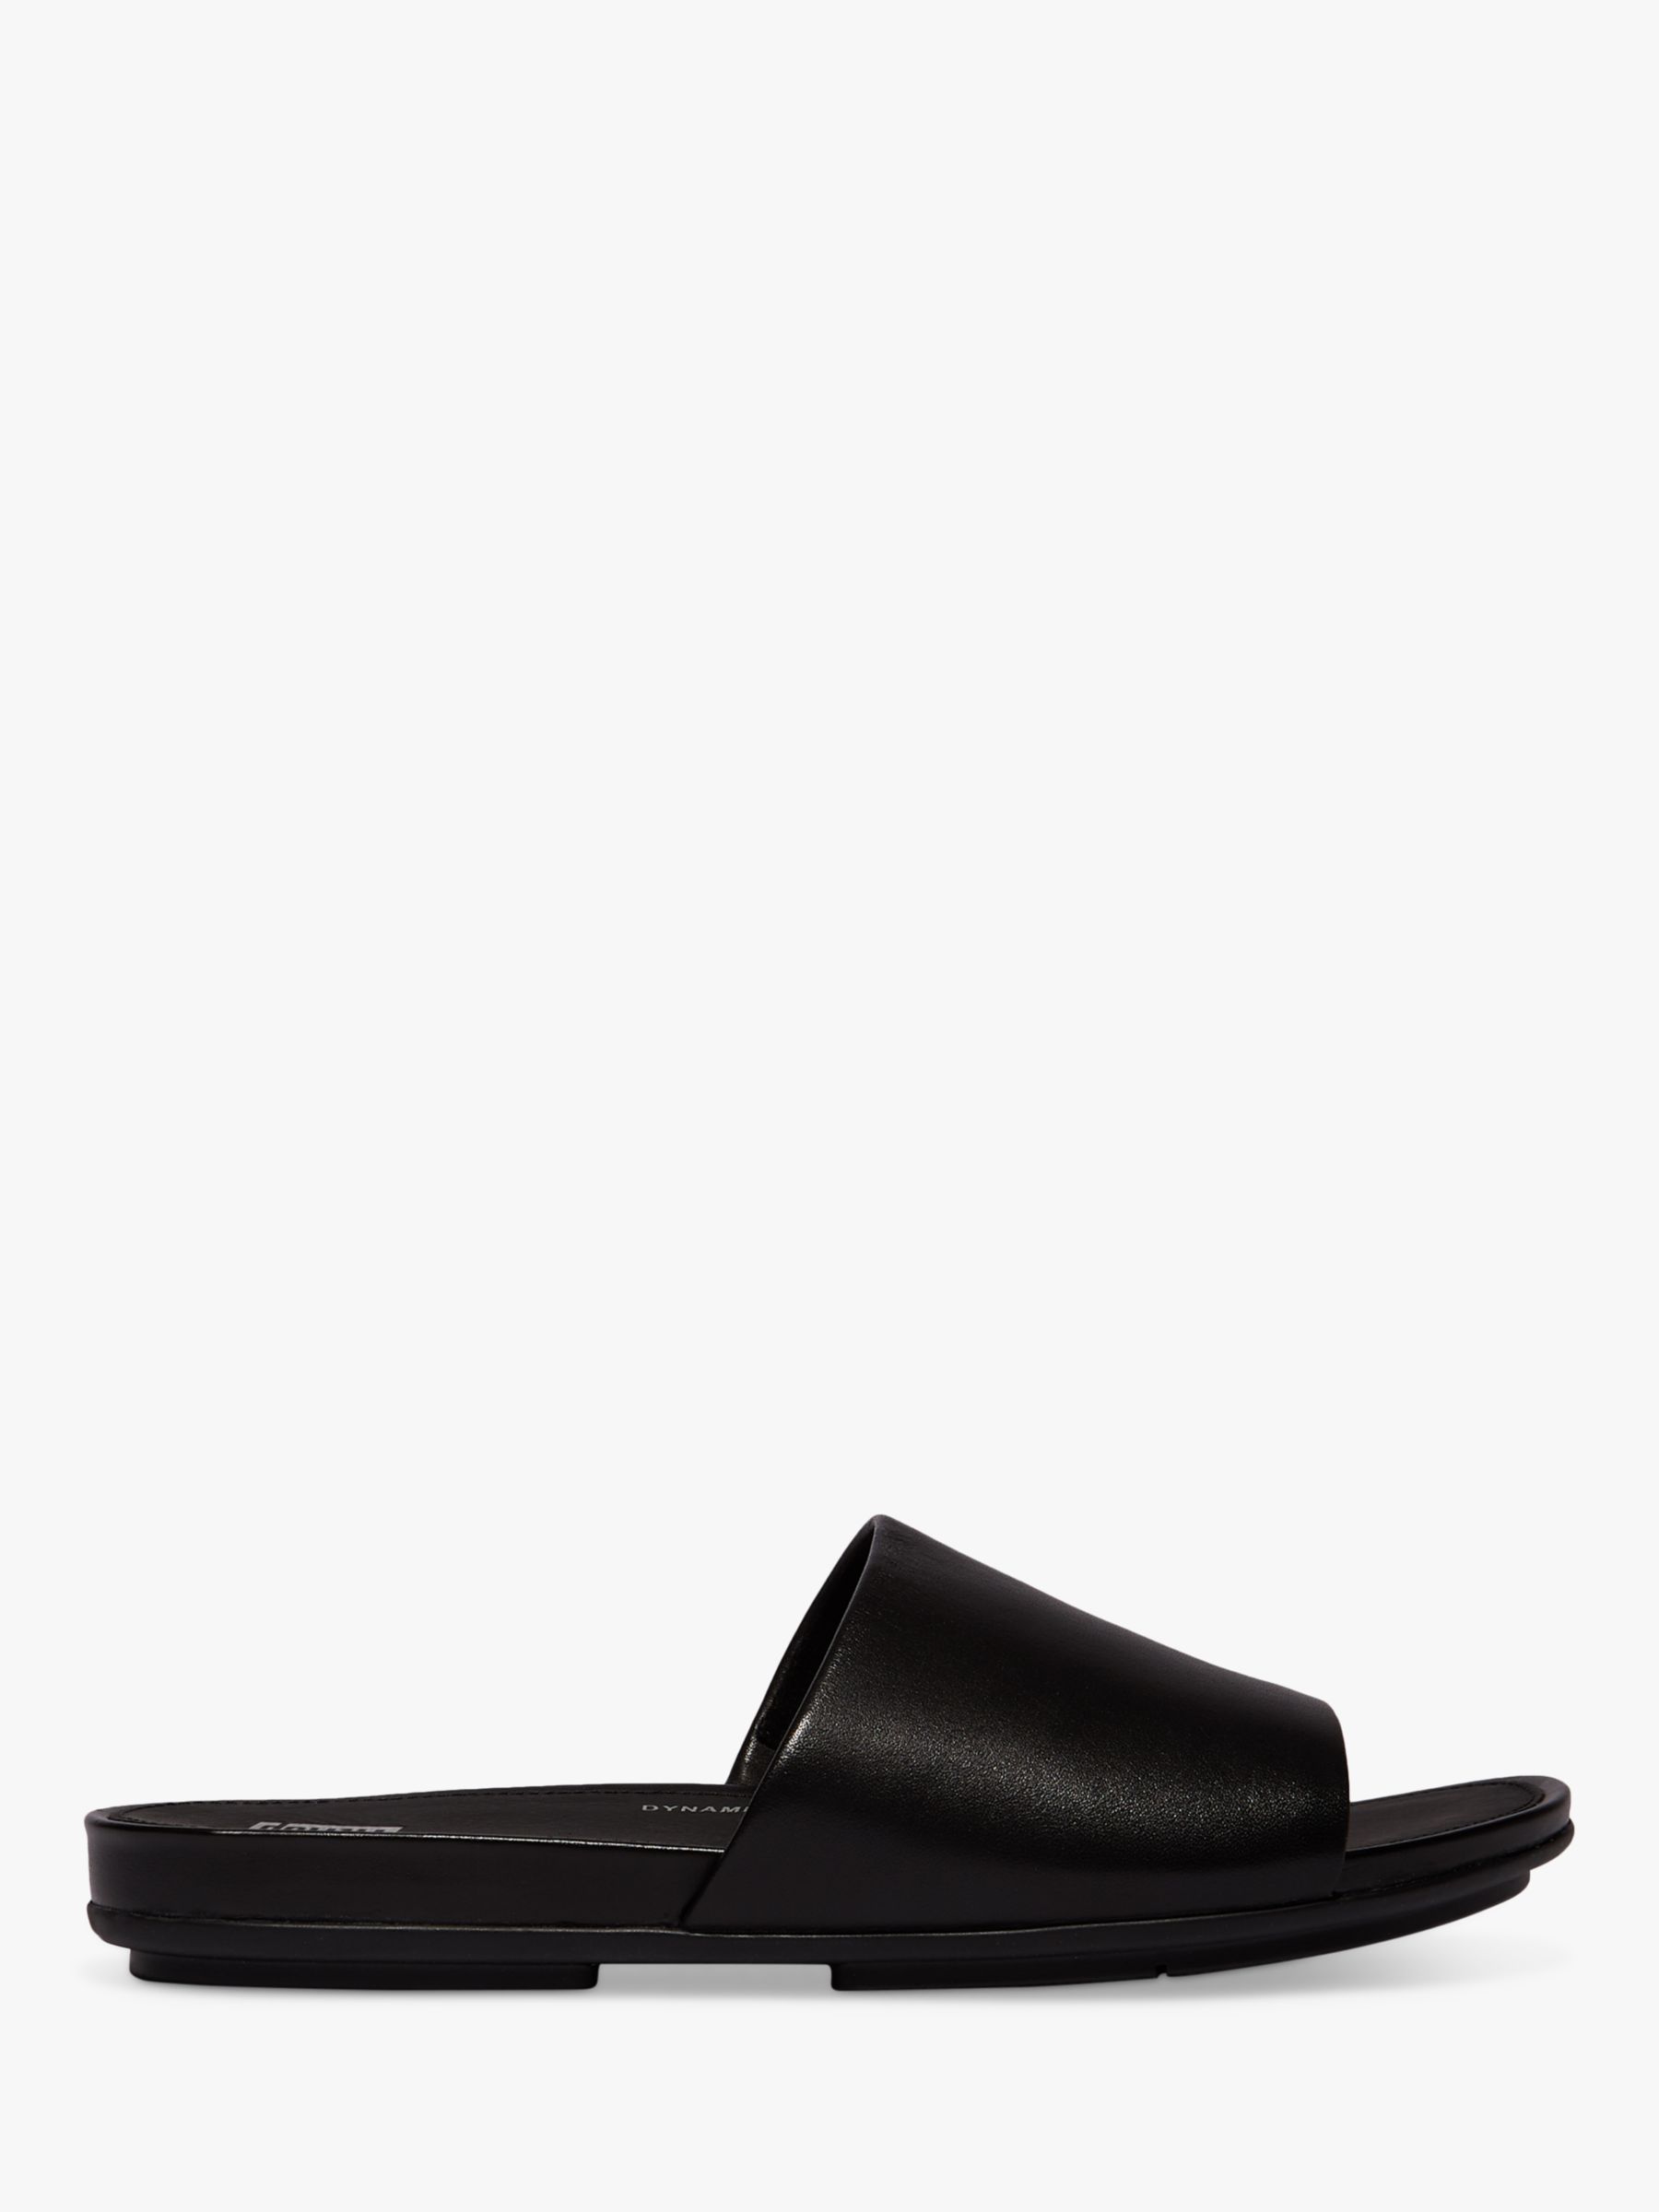 FitFlop Gracie Leather Sliders, All Black at John Lewis & Partners